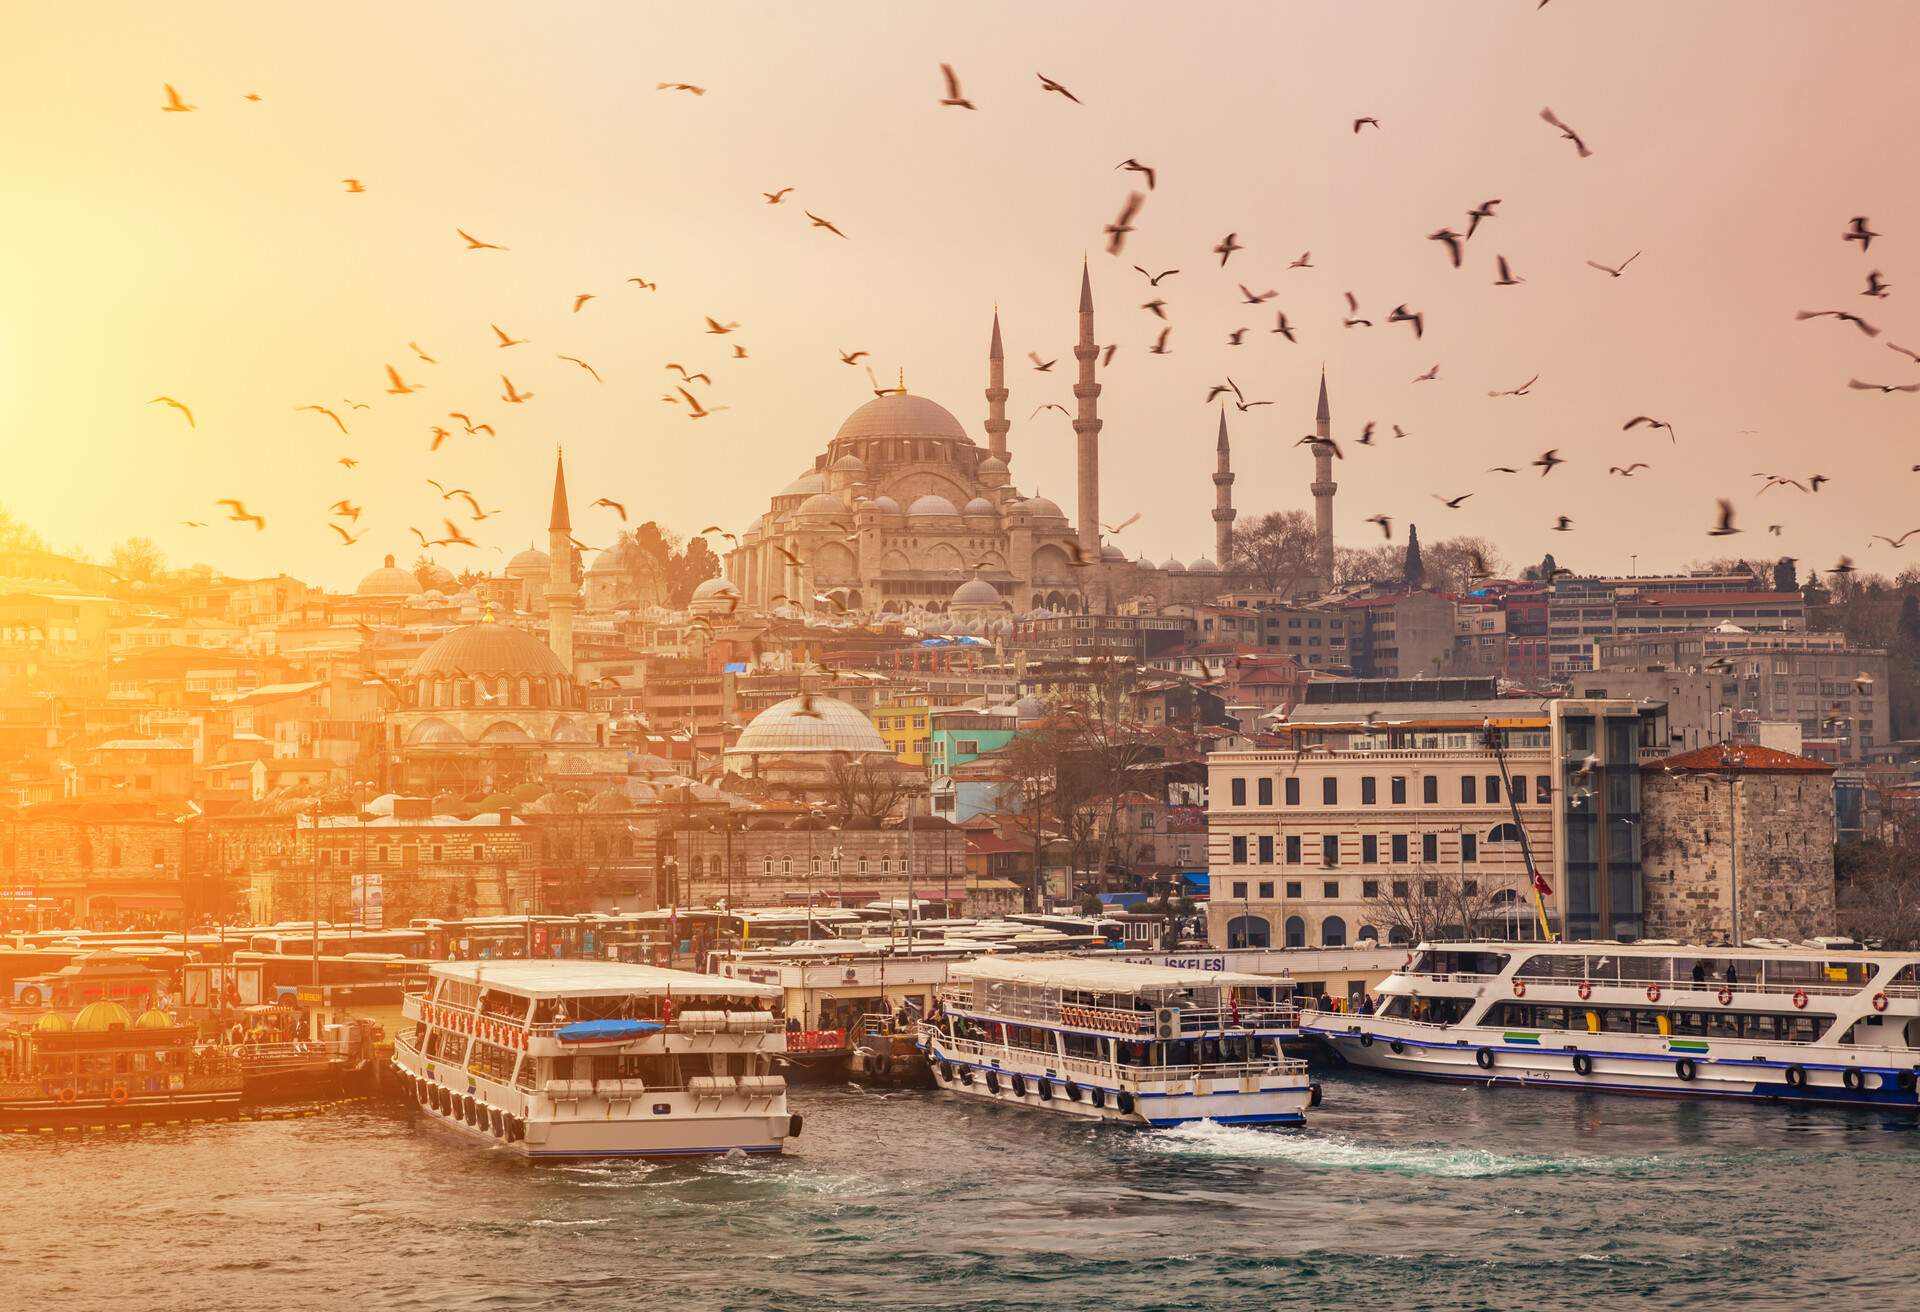 dest_istanbul_ferries_gettyimages-905082694_universal_within-usage-period_82567-1.jpg